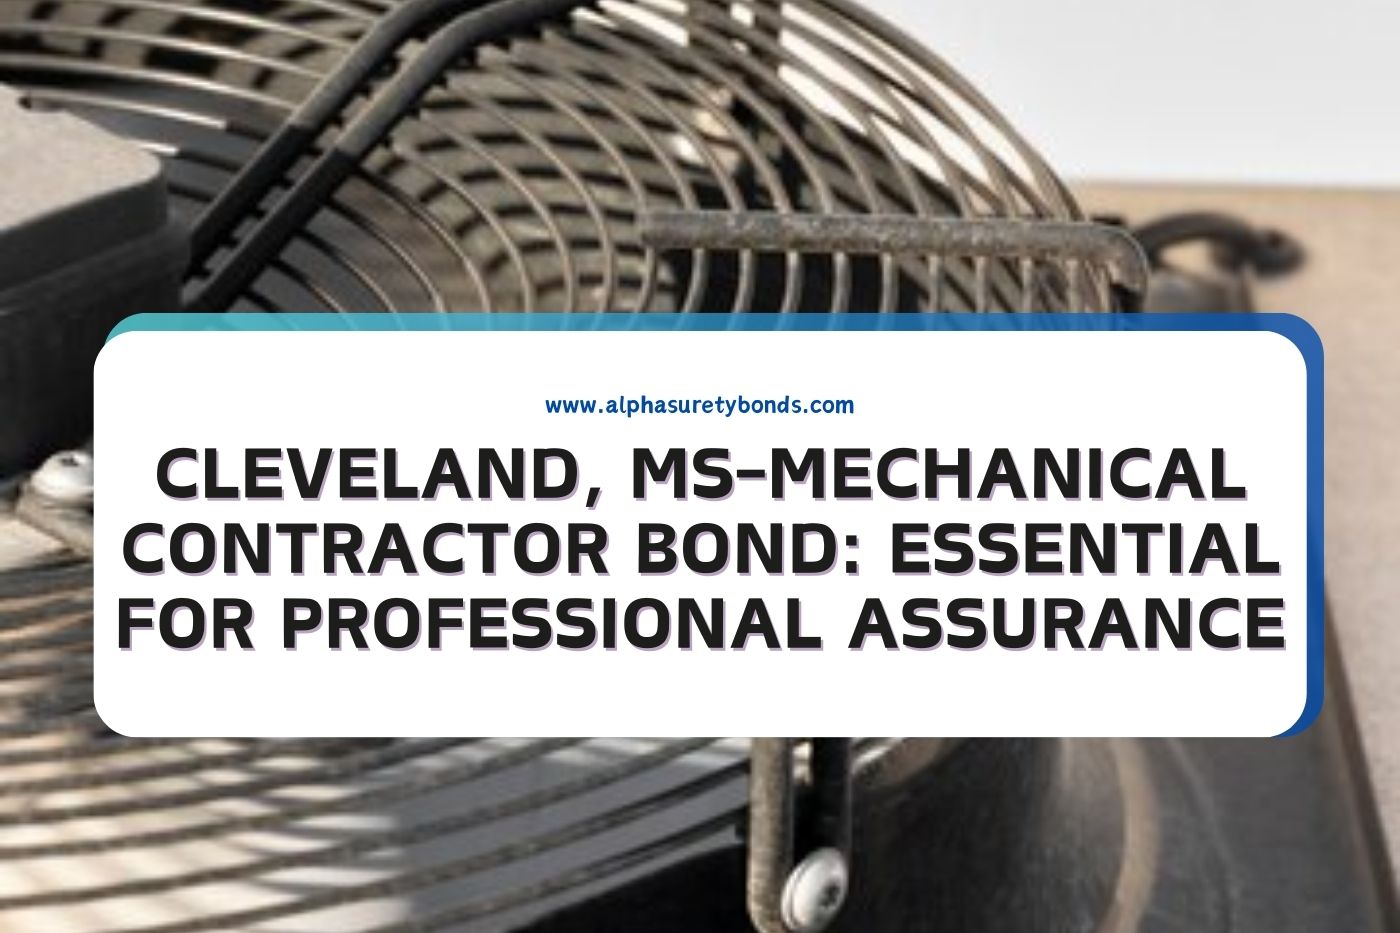 Cleveland, MS-Mechanical Contractor Bond: Essential for Professional Assurance